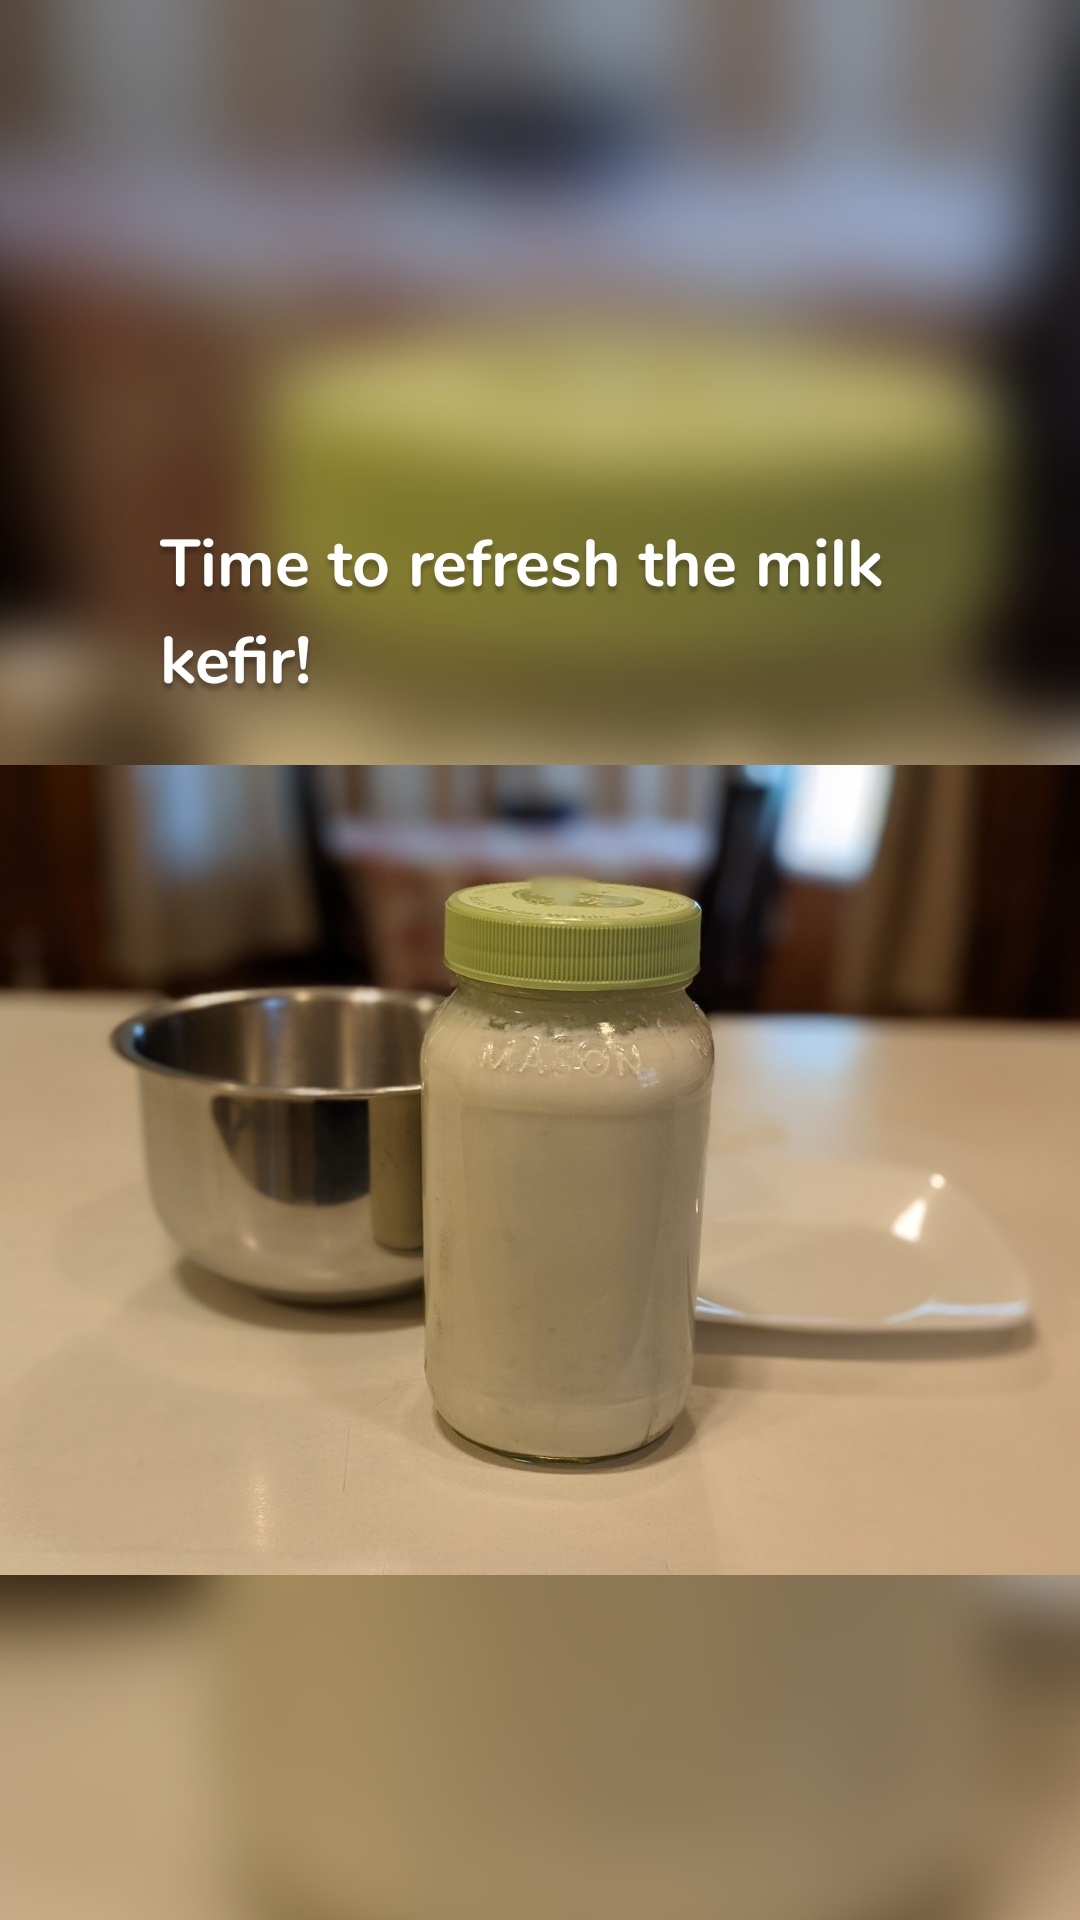 Time to refresh the milk kefir!